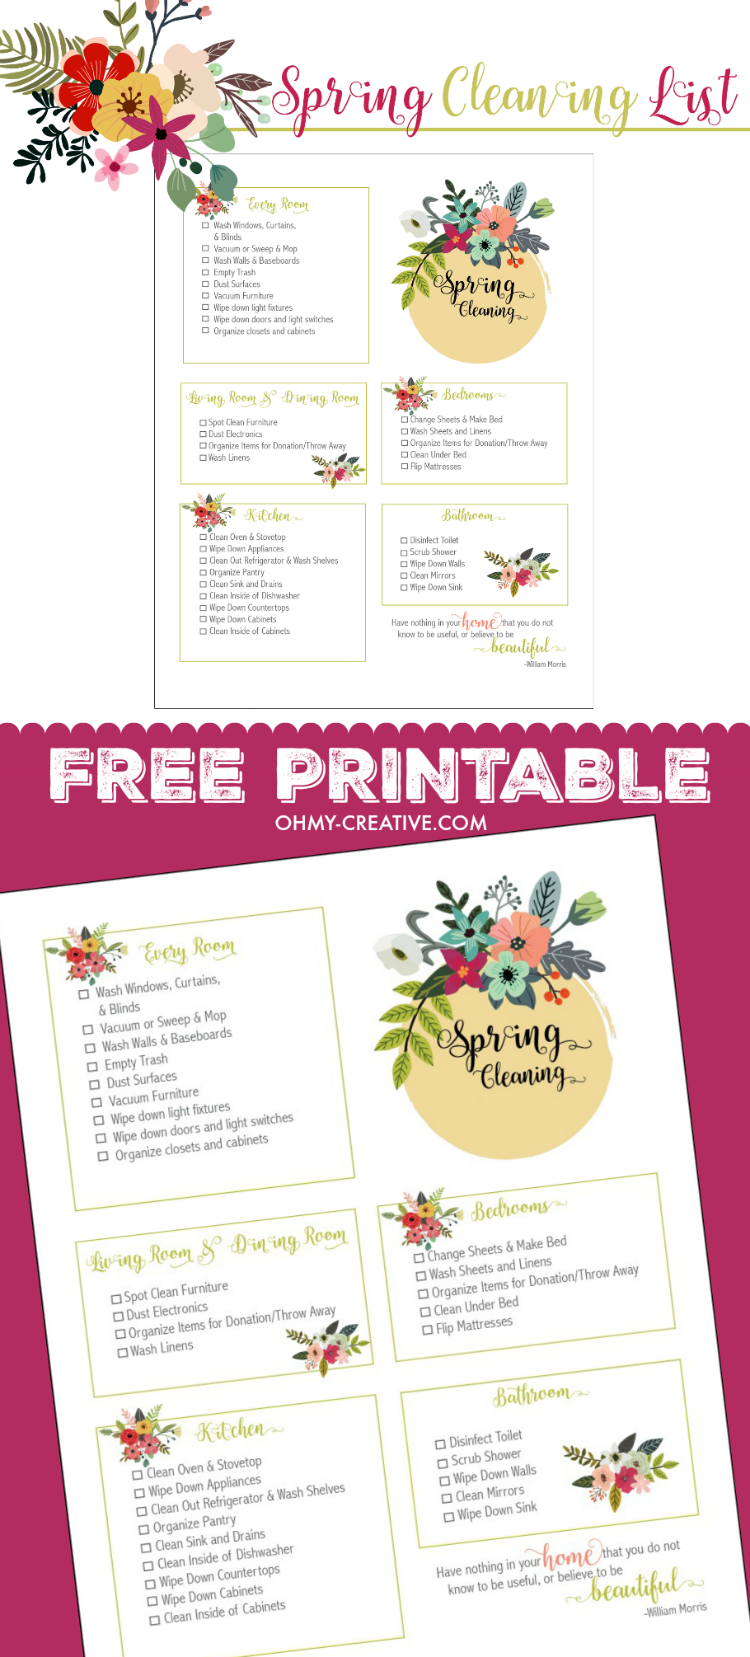 This Spring Cleaning Checklist Free Printable is a perfect way to check off and keep track of those dreaded cleaning chores. The pretty floral printable will help ease the pain of your cleaning schedule and keep you on task to make your home sparkle! | OHMY-CREATIVE.COM